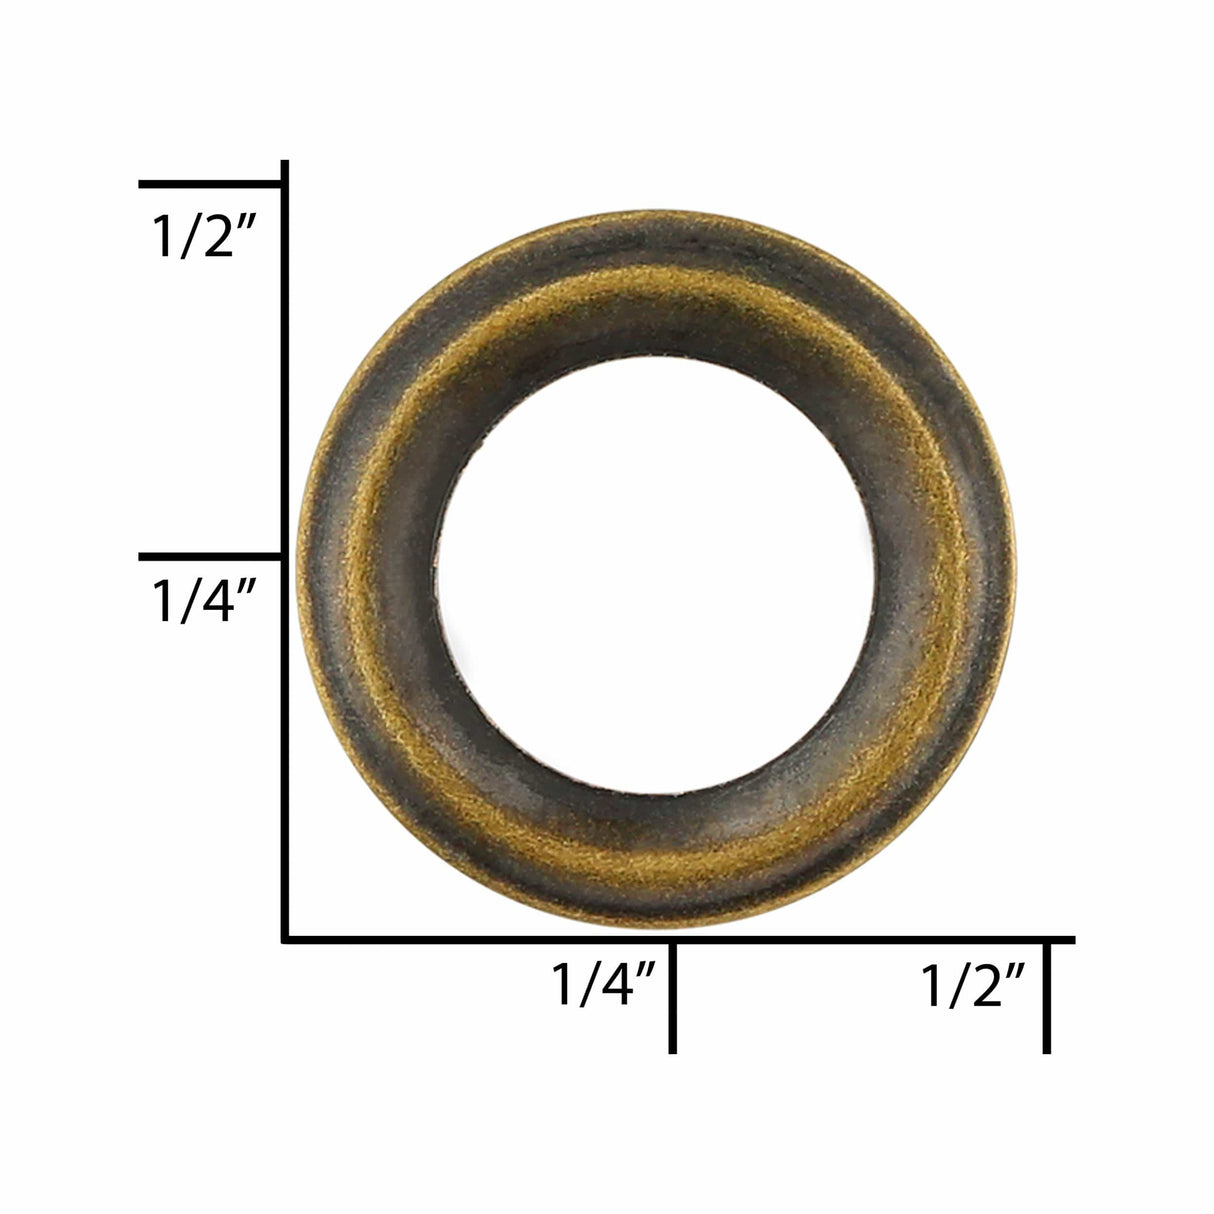 Ohio Travel Bag Fasteners 1/4" Antique Brass, Washer, Steel- 24 pk, #A-400-ANTB A-400-ANTB